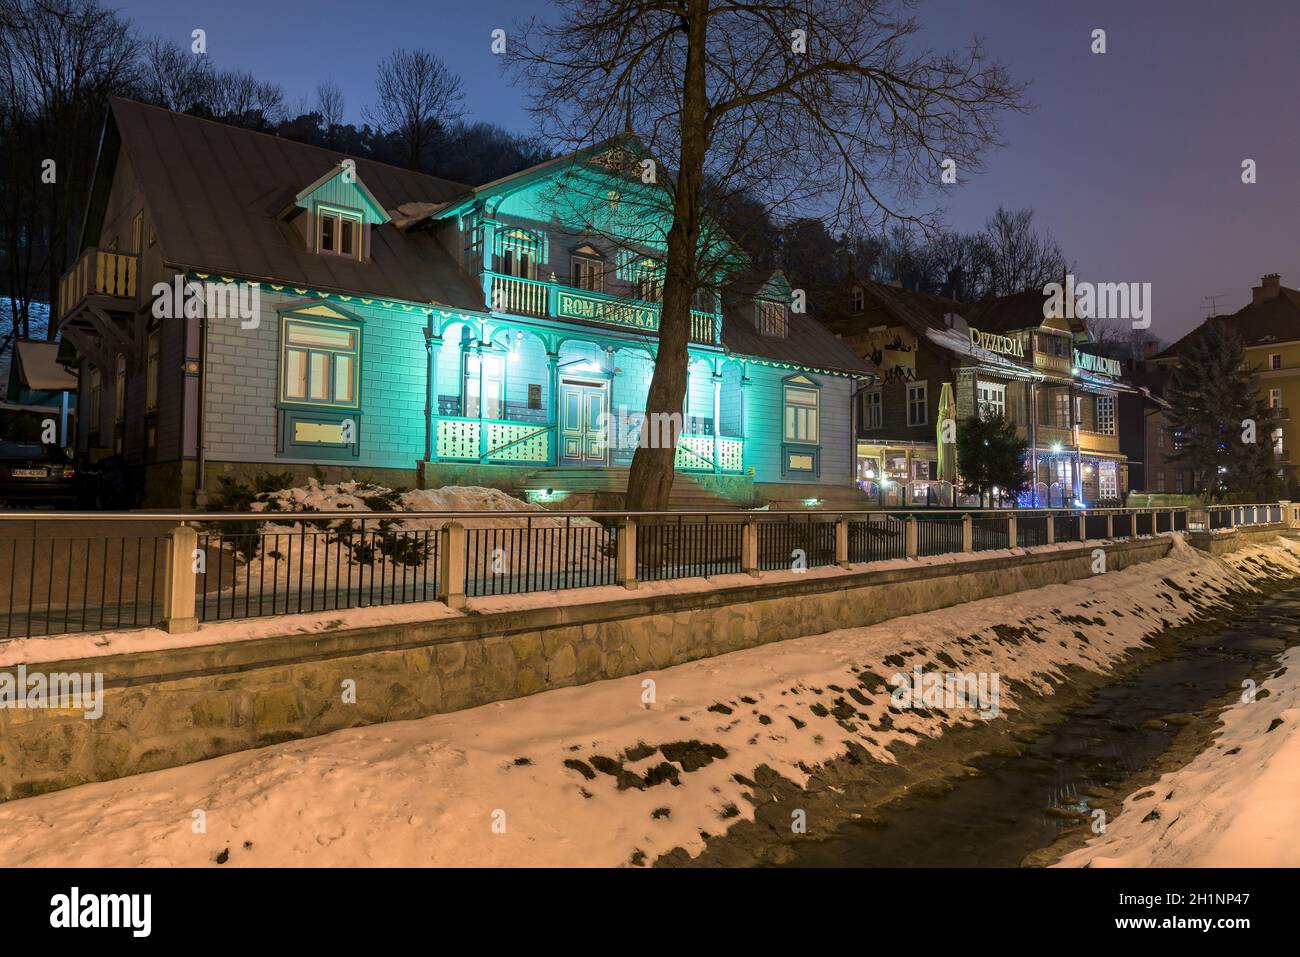 Krynica Zdroj, Poland - January 26, 2020: Winter night view of historic buildings at Dietls Boulevards in Krynica Zdroj, famous spa town in southern P Stock Photo